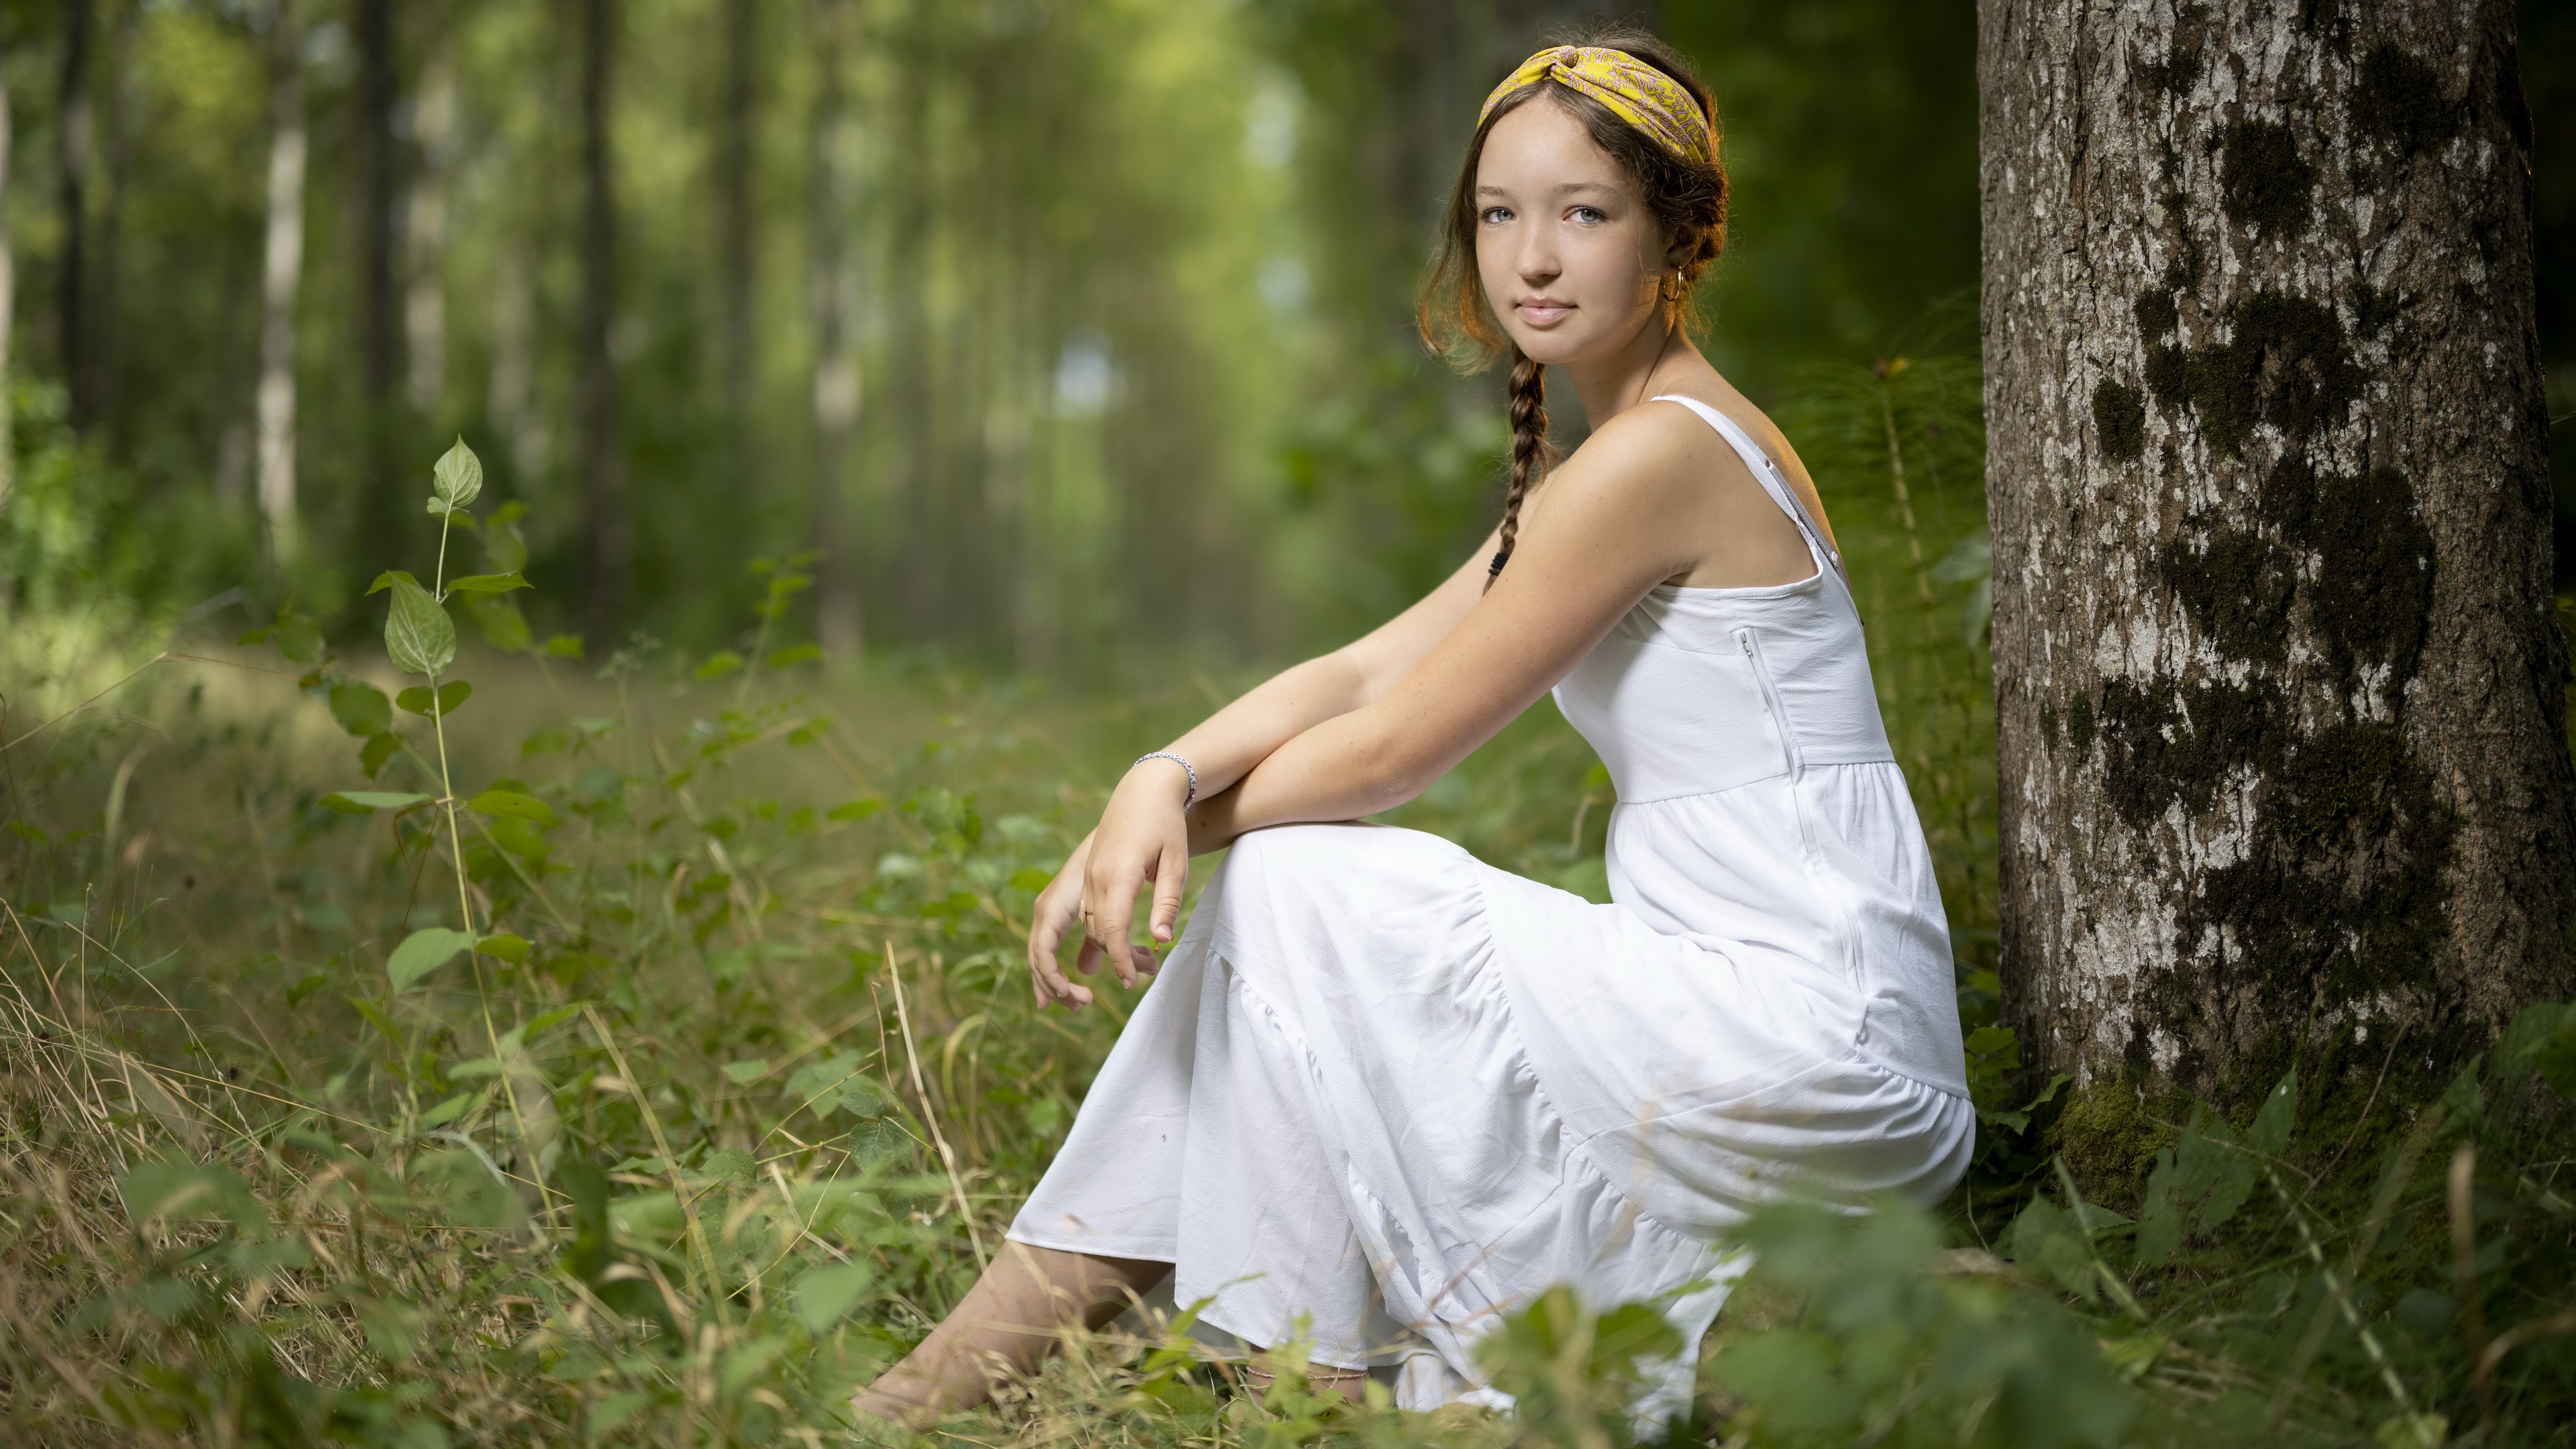 Women Outdoors Women Outdoors Model Plants Looking At Viewer Dress White Dress Brunette Hairband Whi 3840x2160